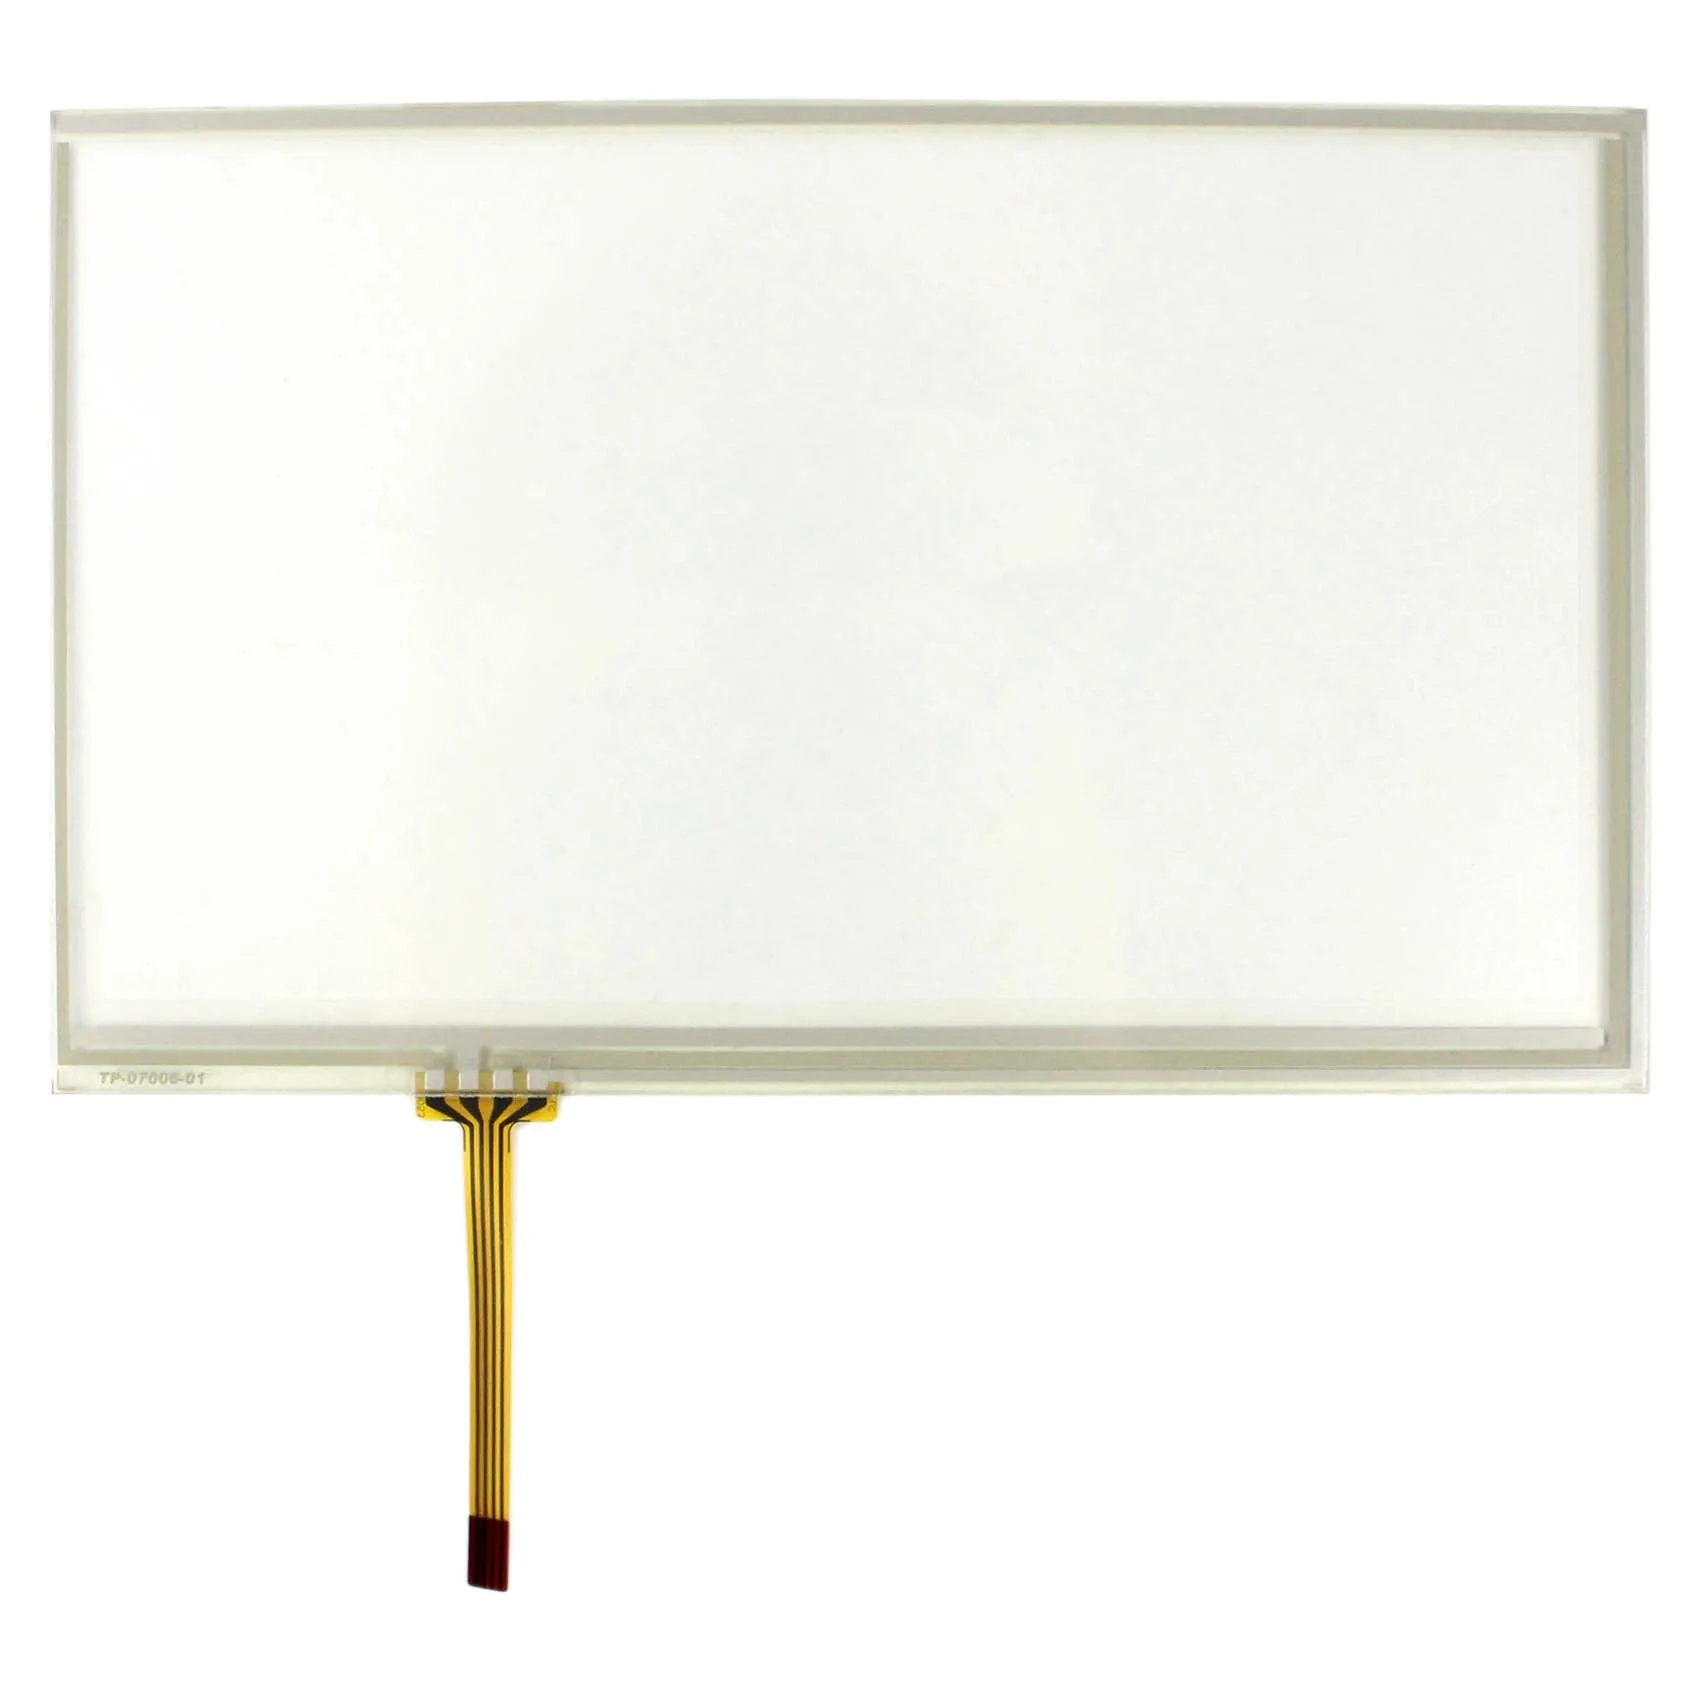 7 Inch Touch Screen 4 wire resistive touch panel RXA-070029-06